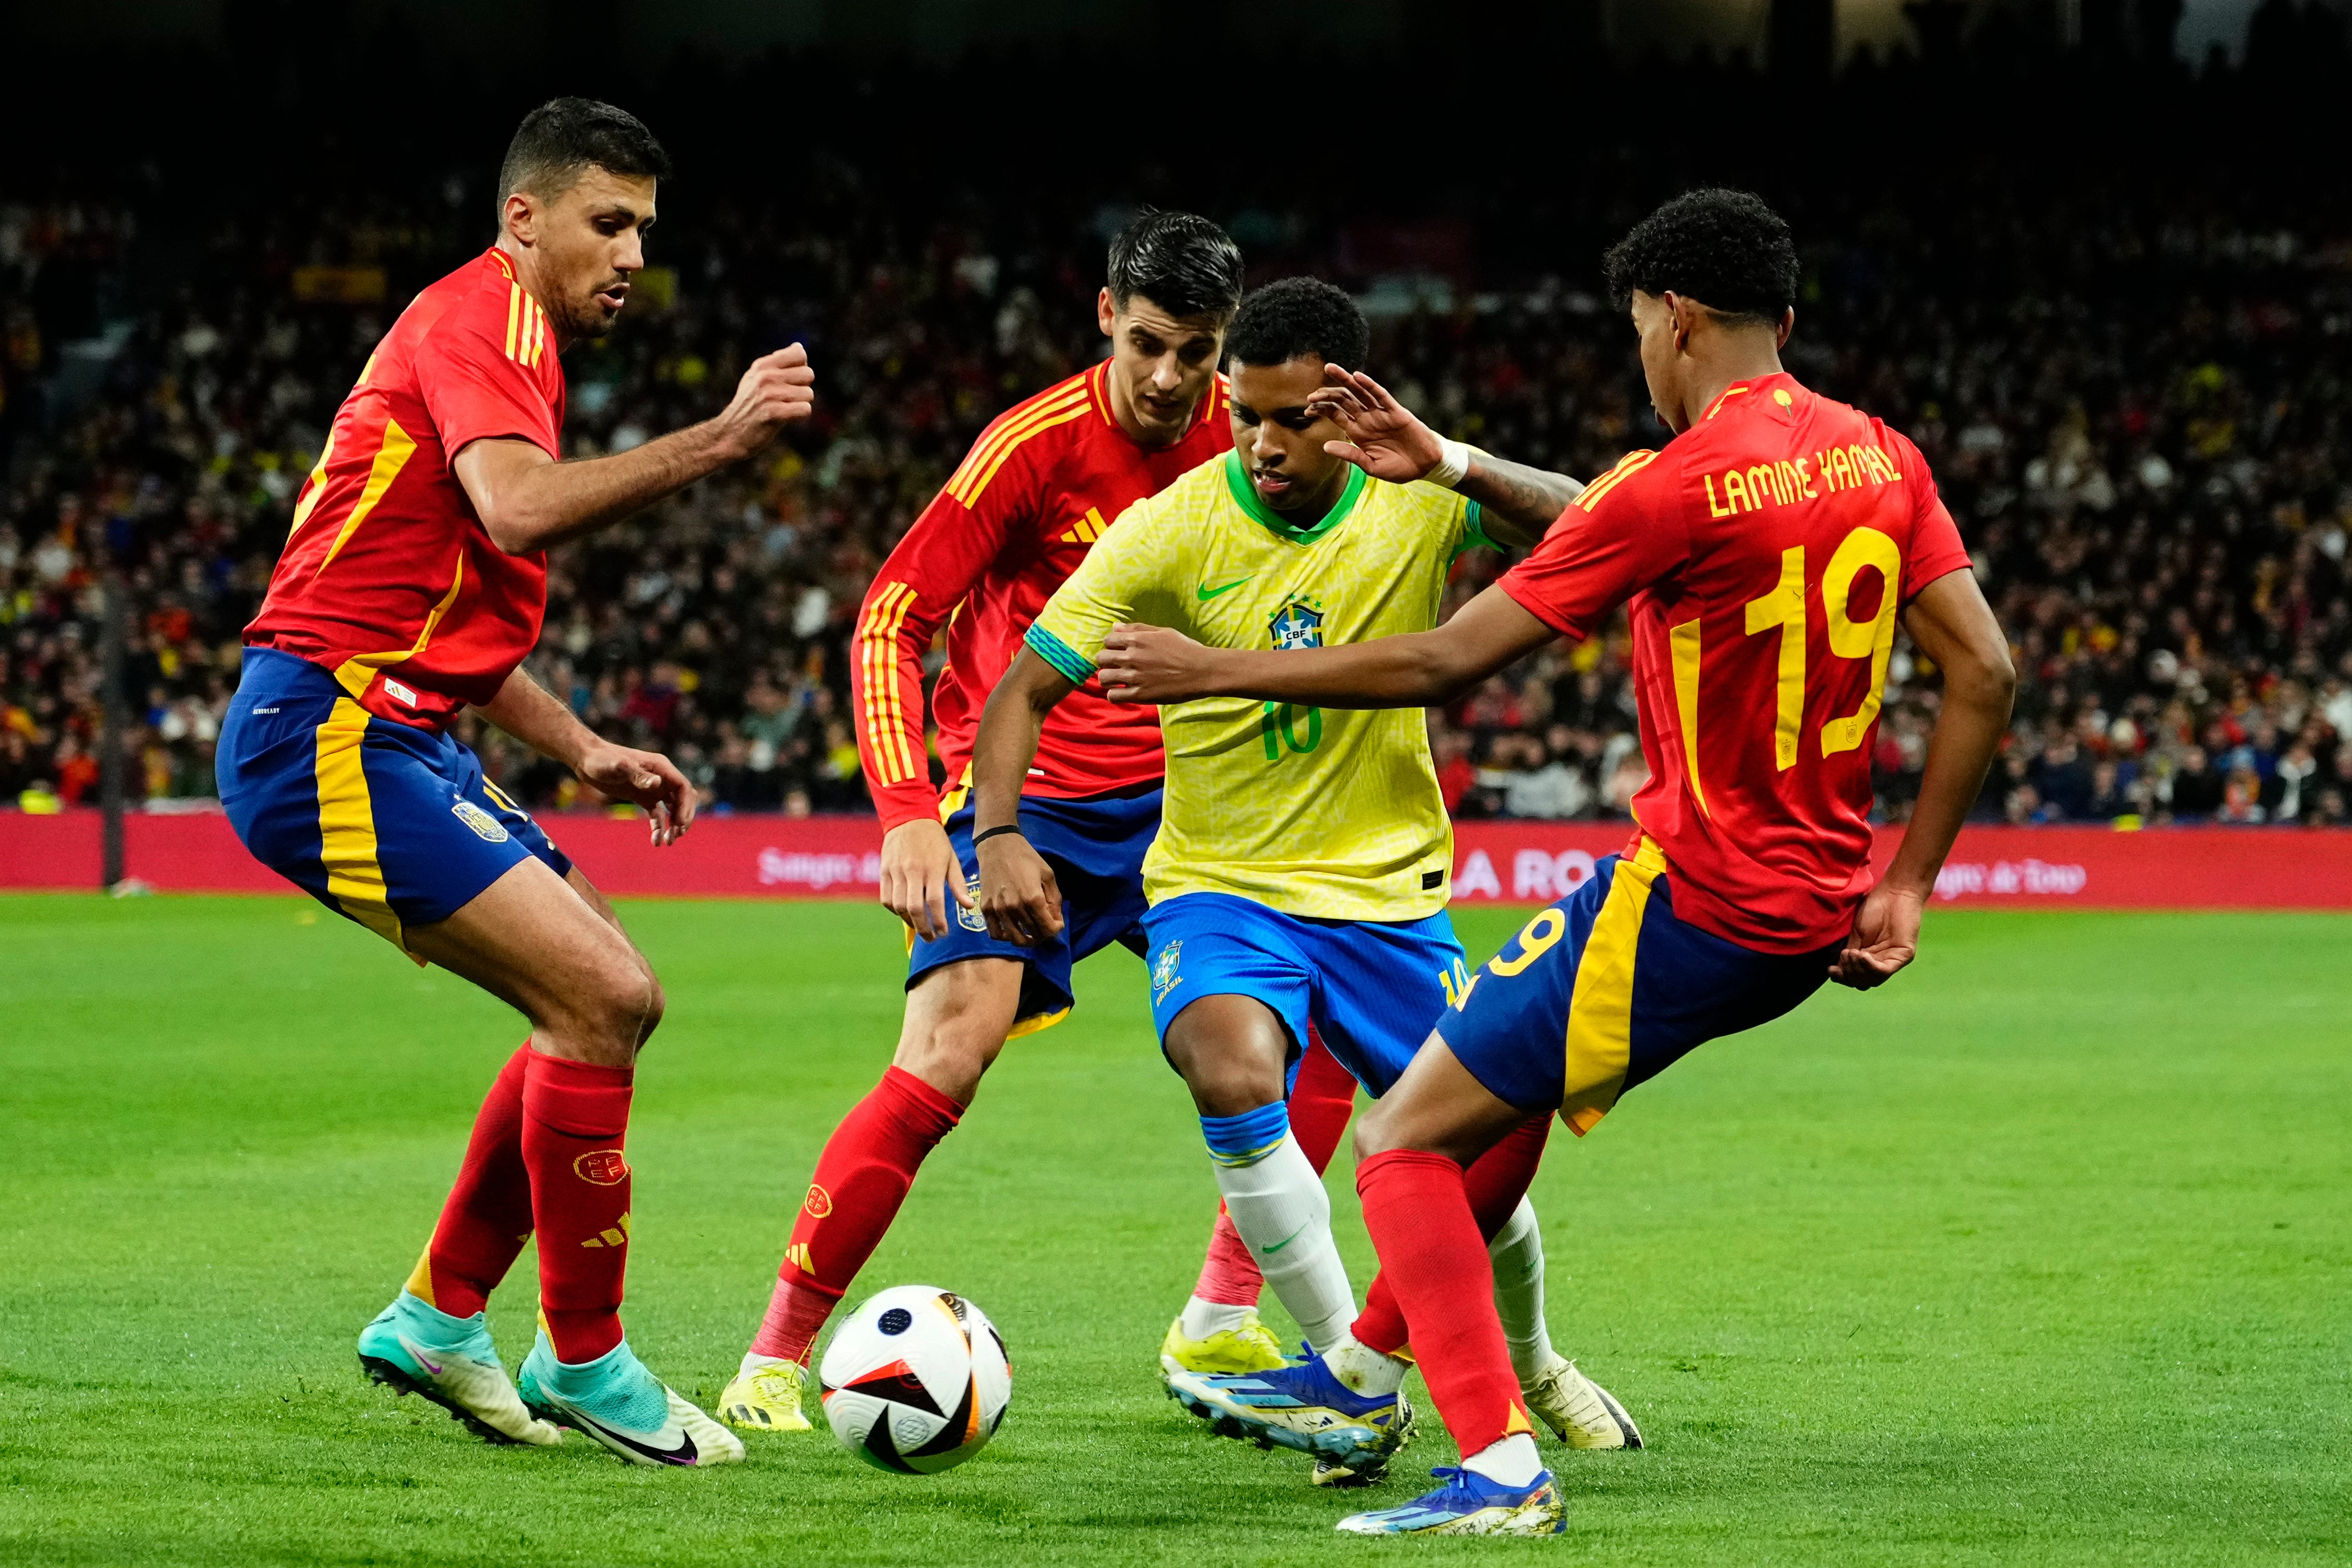 Spain drew with Brazil in a 3-3 thriller